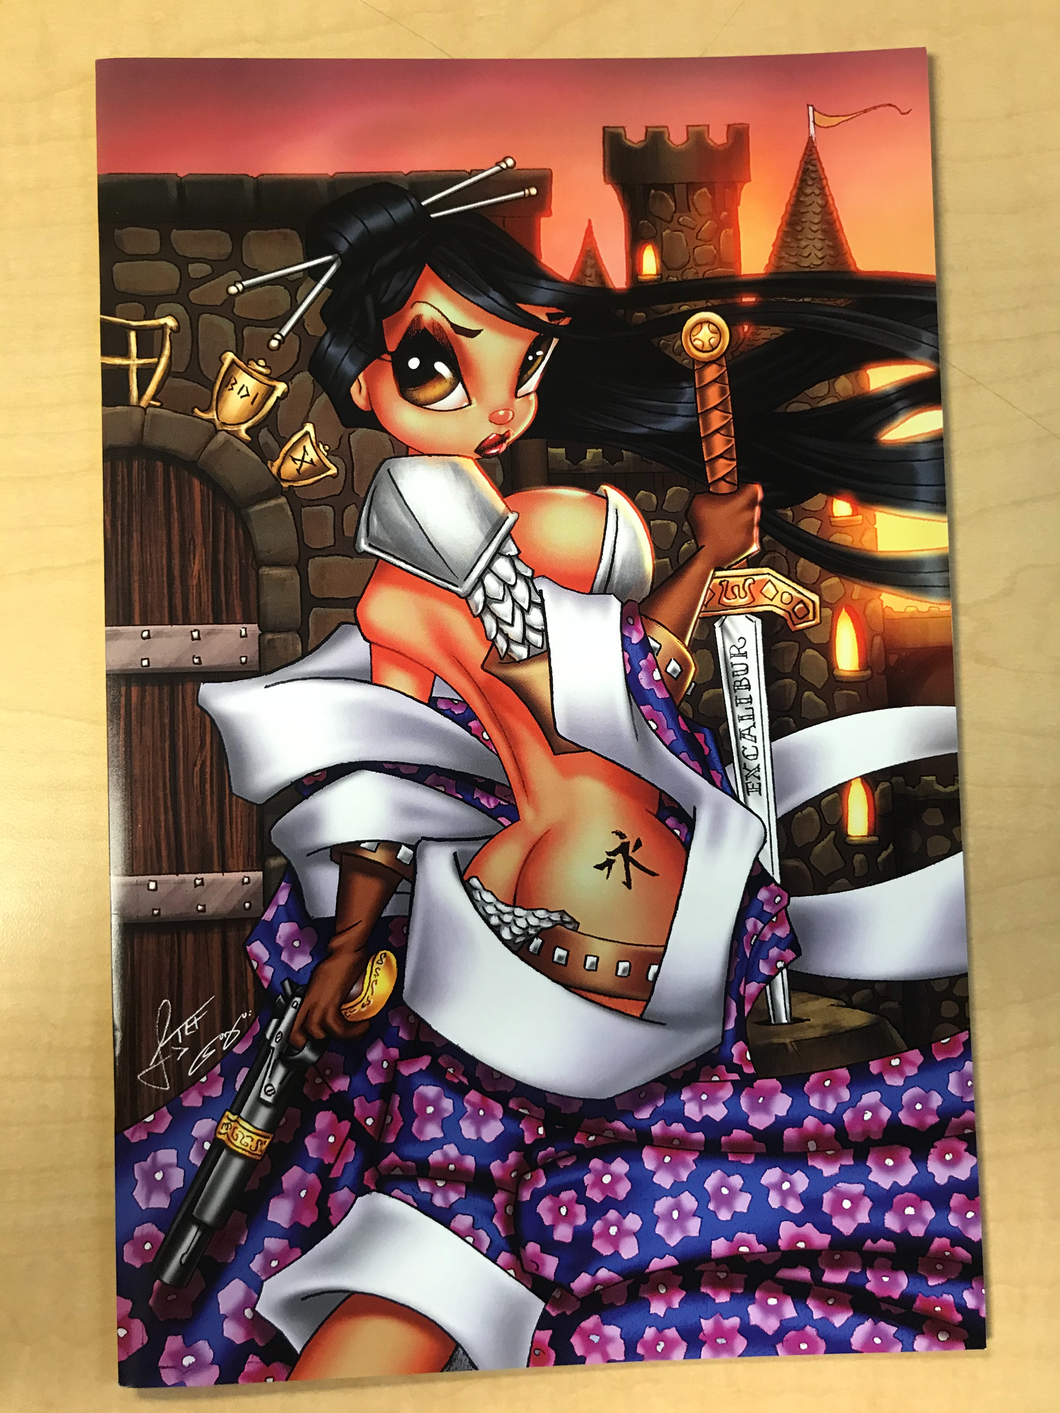 Shahrazad Side Quests: The Geisha in King Arthurs Court ETERNAL Variant Cover by STEF WILSON & Sanju Nivangune Limited to 150 Copies!!!